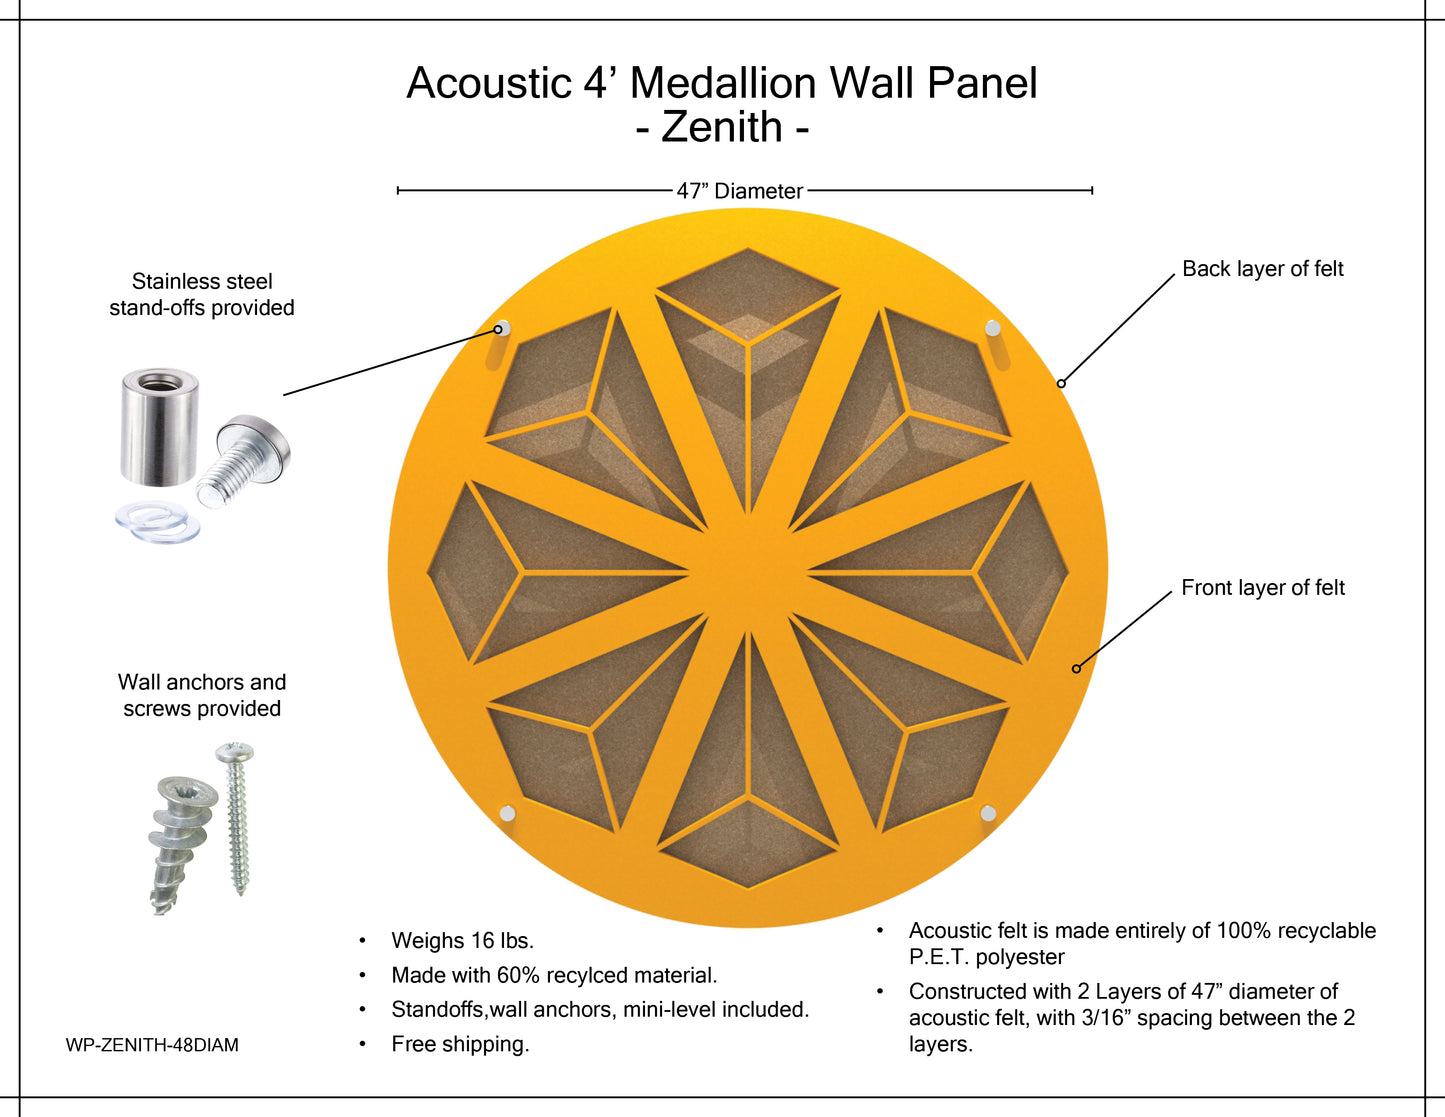 Medallion Acoustic Wall Panel - Zenith